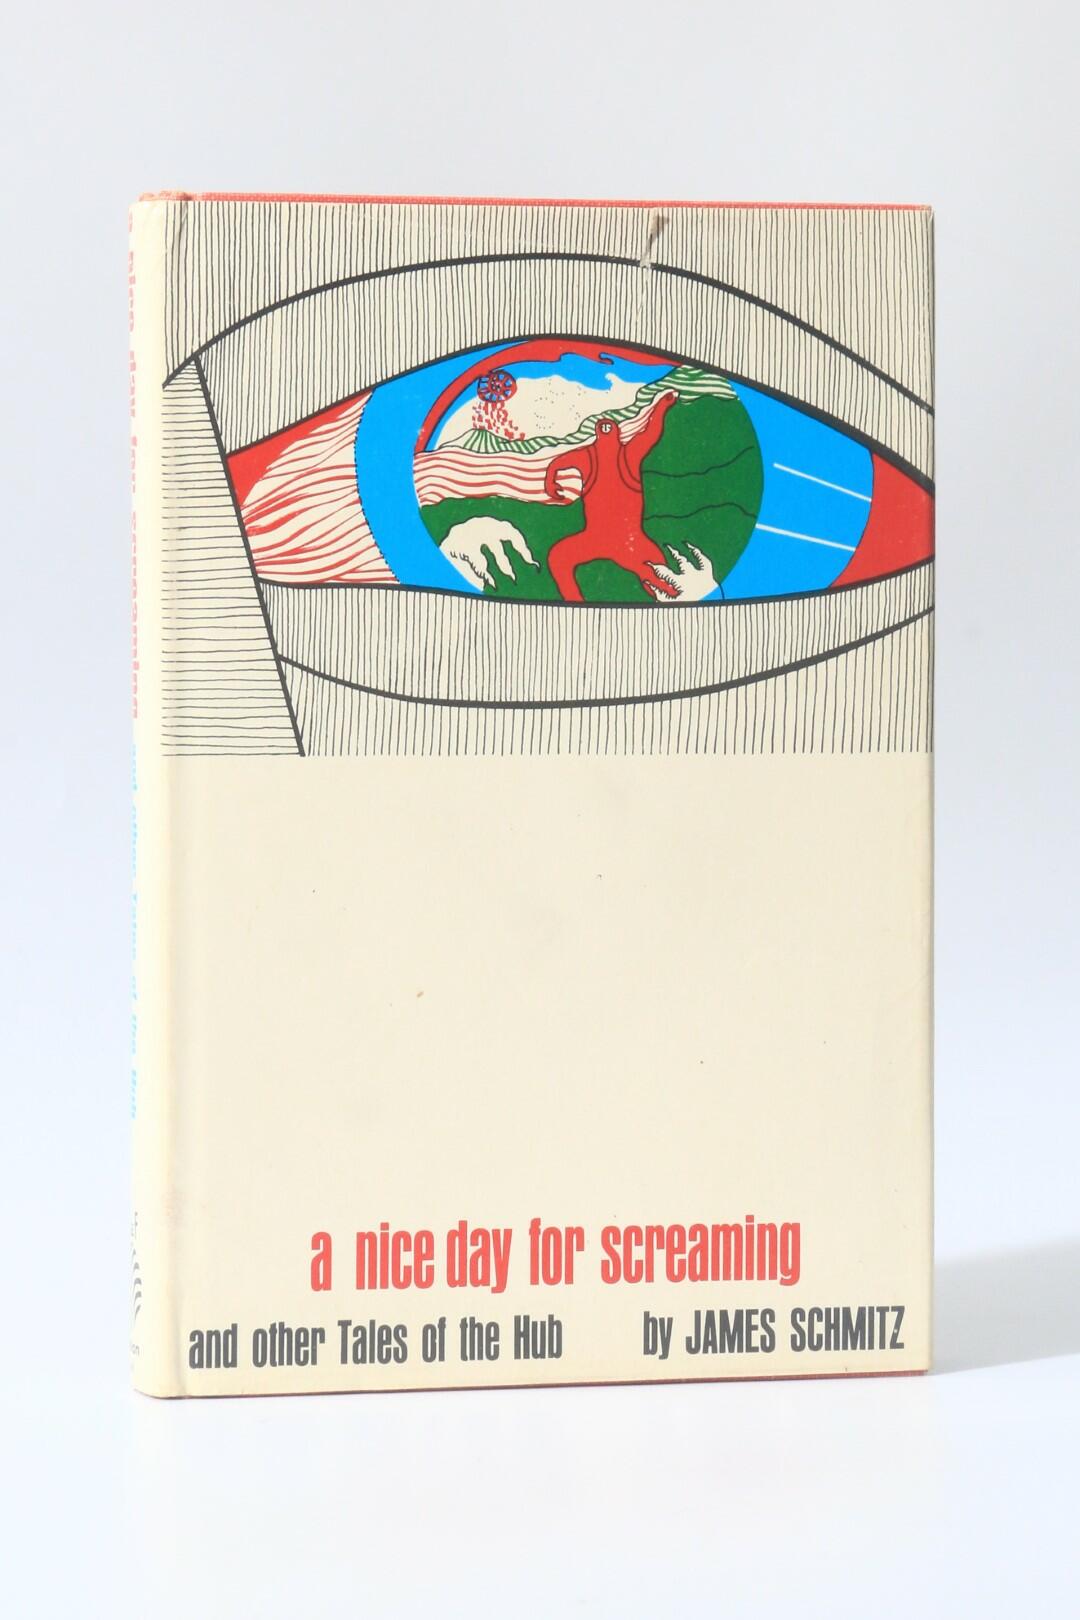 James Schmitz - A Nice Day for Screaming and Other Tales of the Hub - Chilton Books, 1965, First Edition.